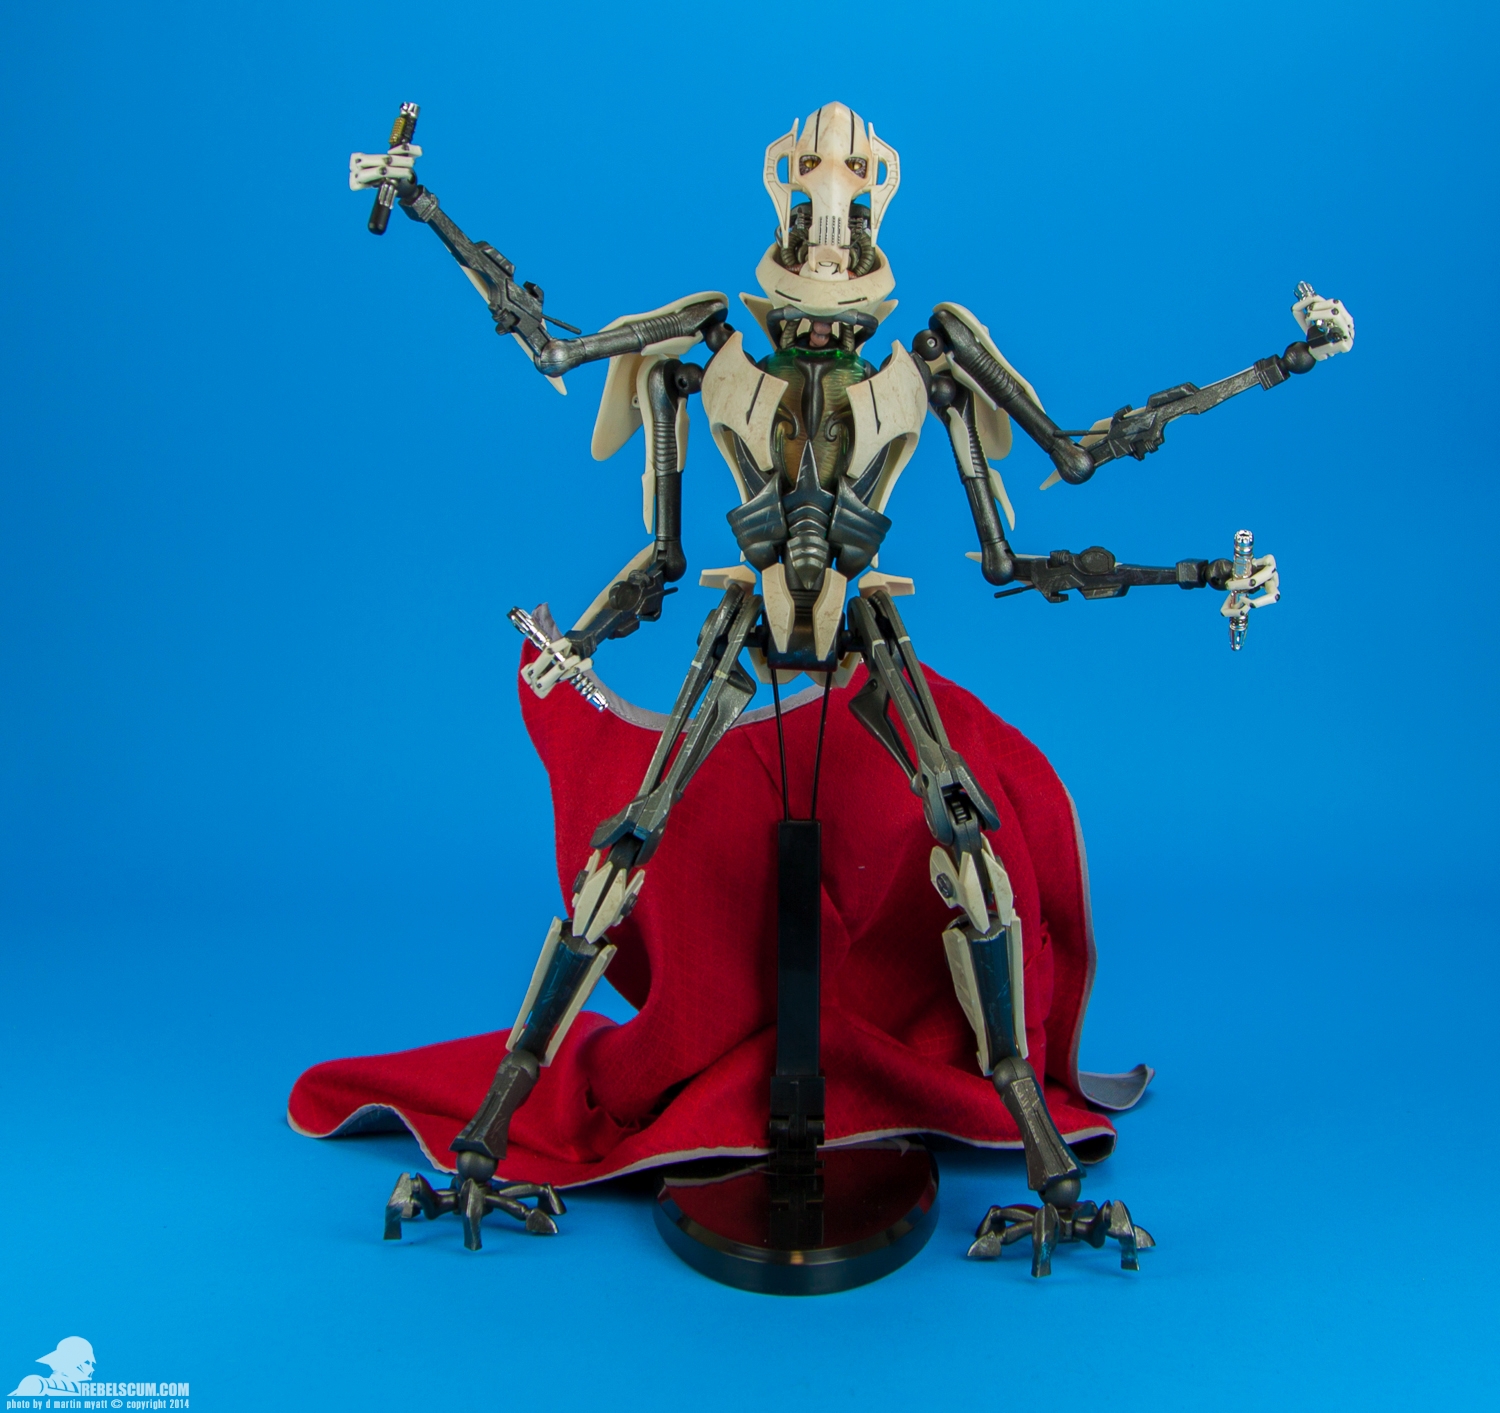 General-Grievous-Sixth-Scale-Figure-Sideshow-Collectibles-032.jpg